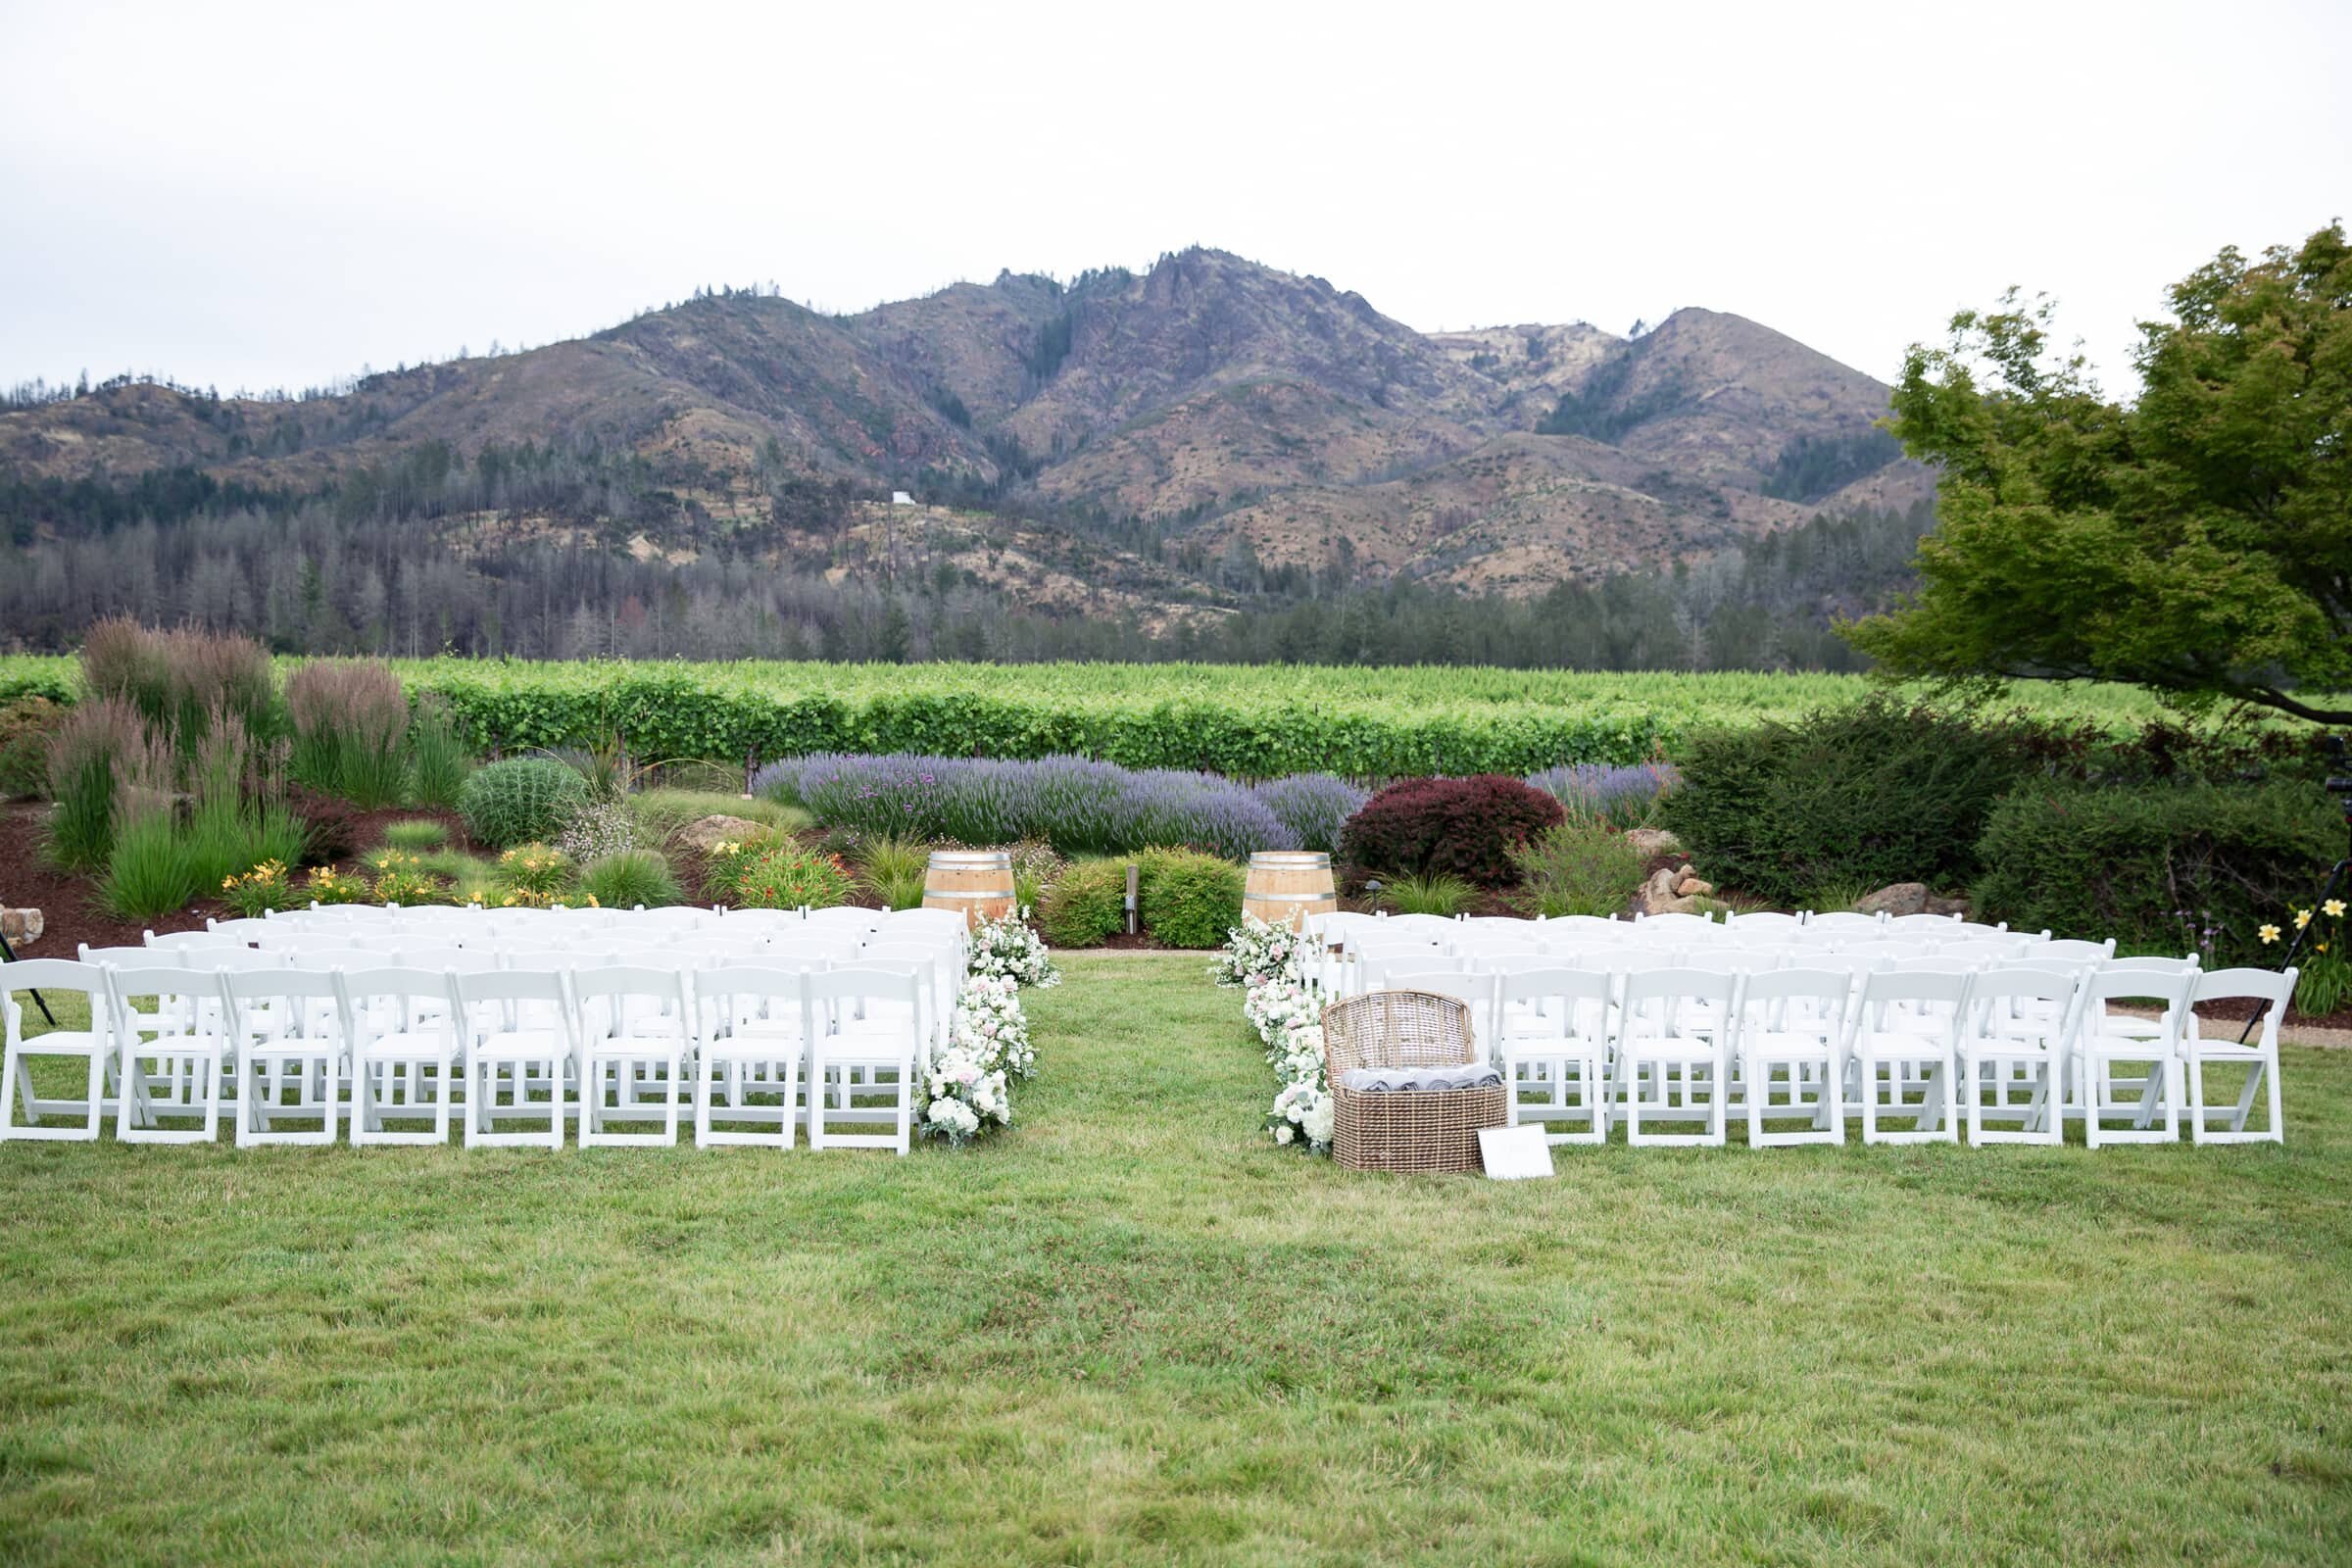 destination wedding at the sonoma county winery. Ceremony setup against mountain views.